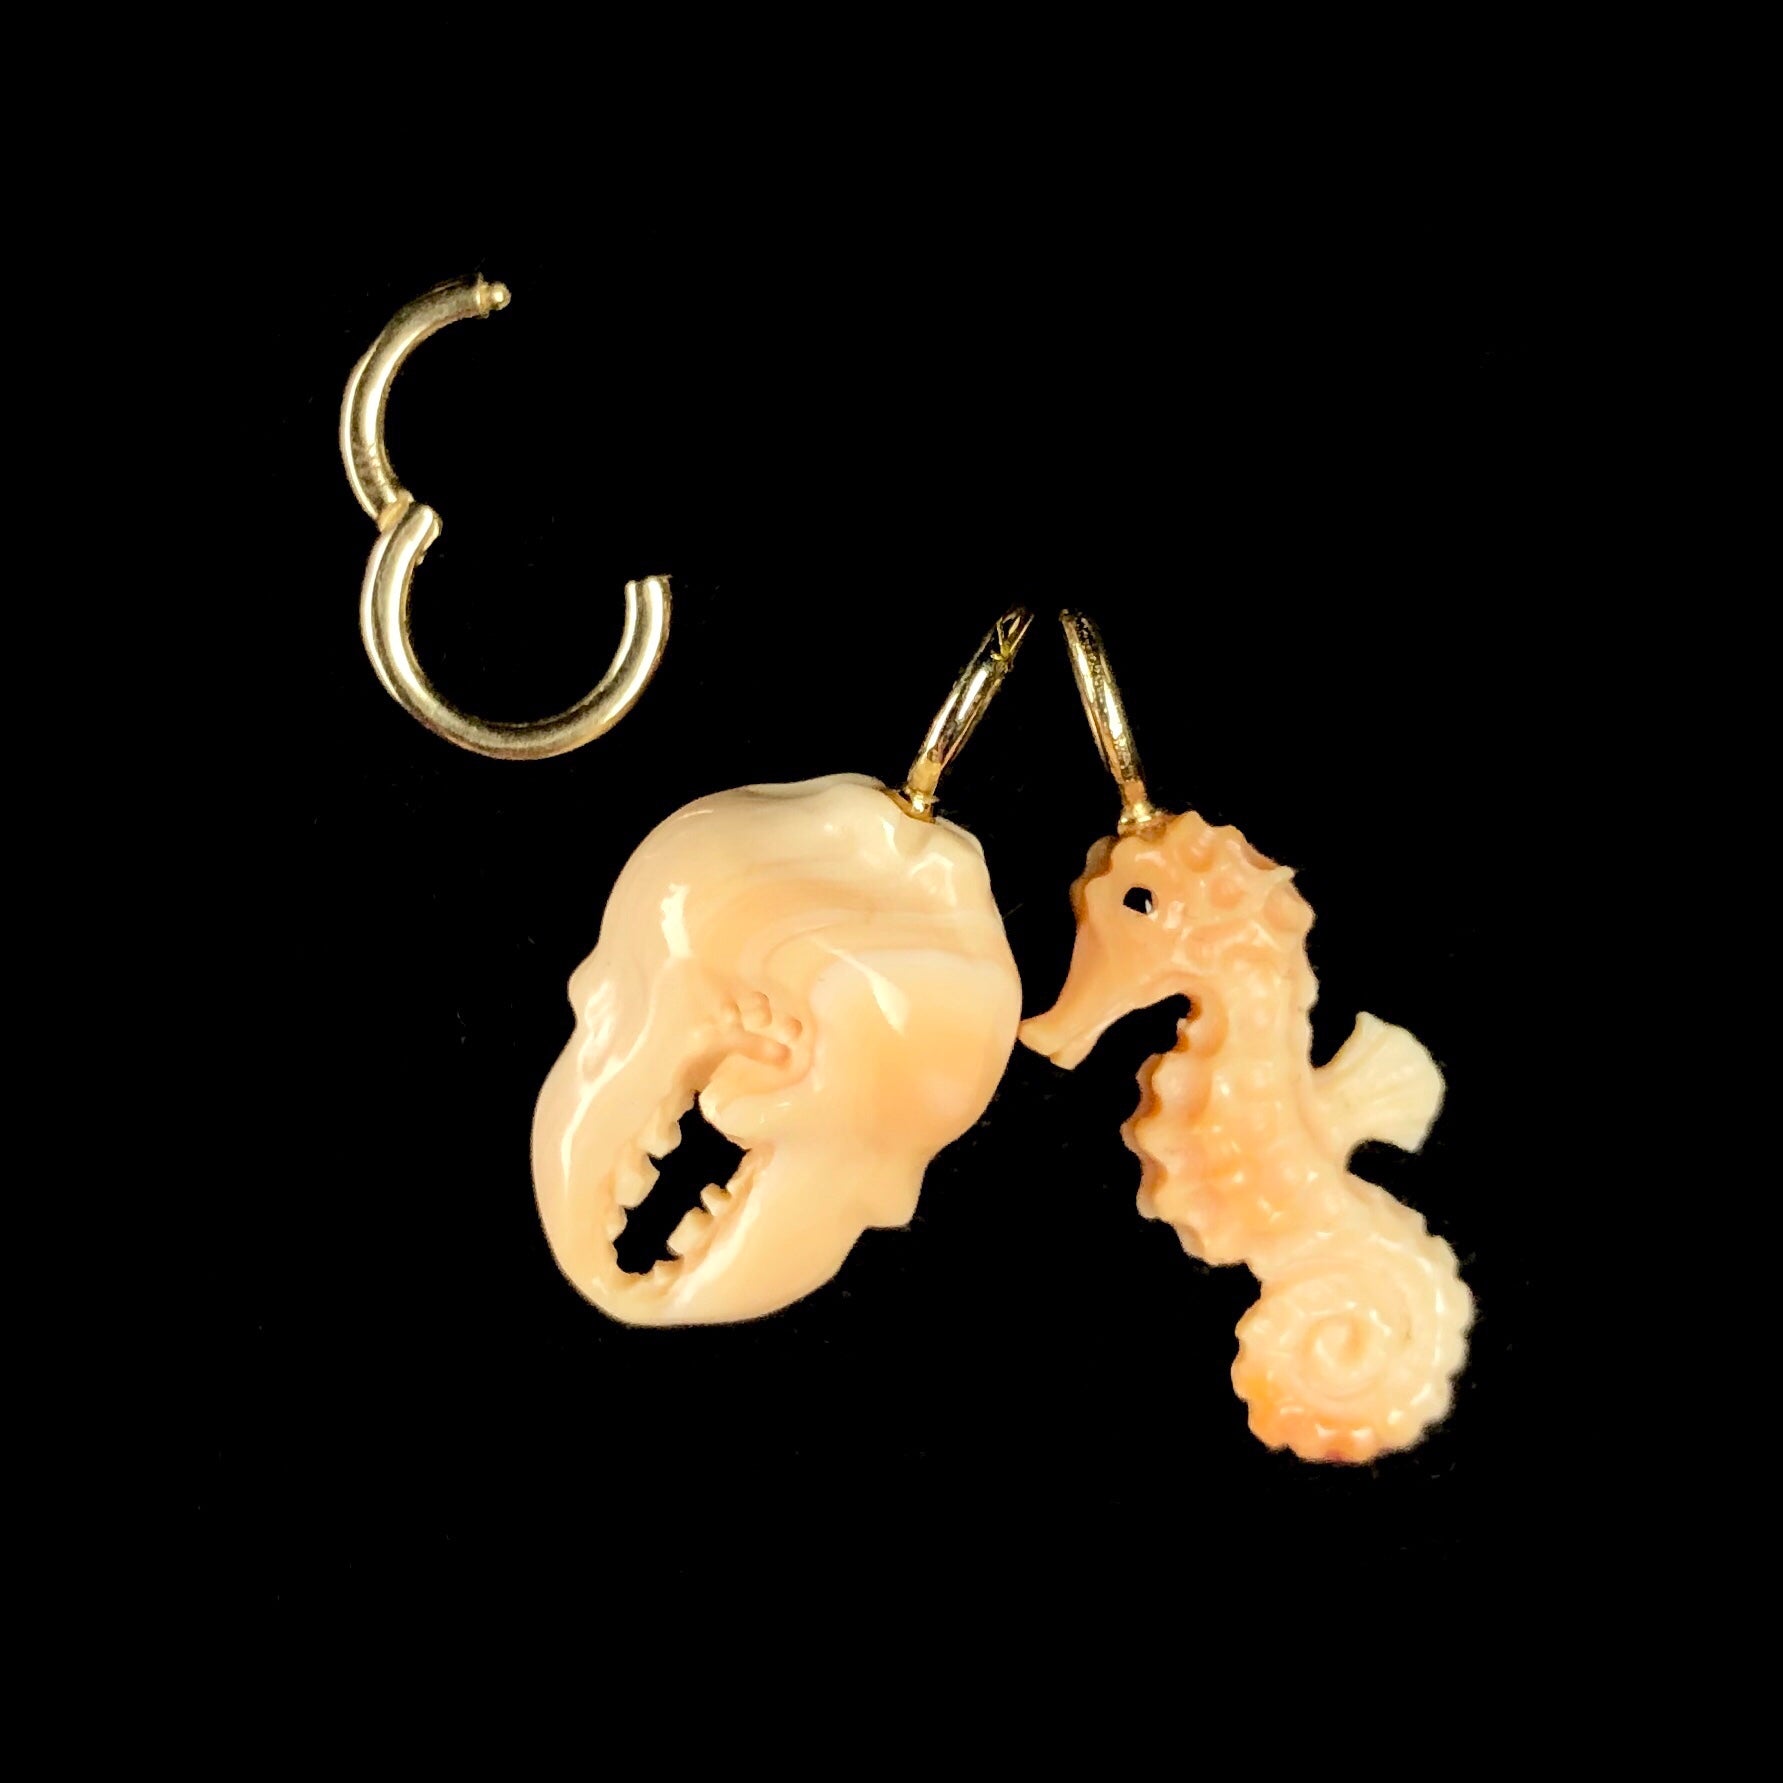 Collection of Conch Shell Charms with Crab Claw seen in the center